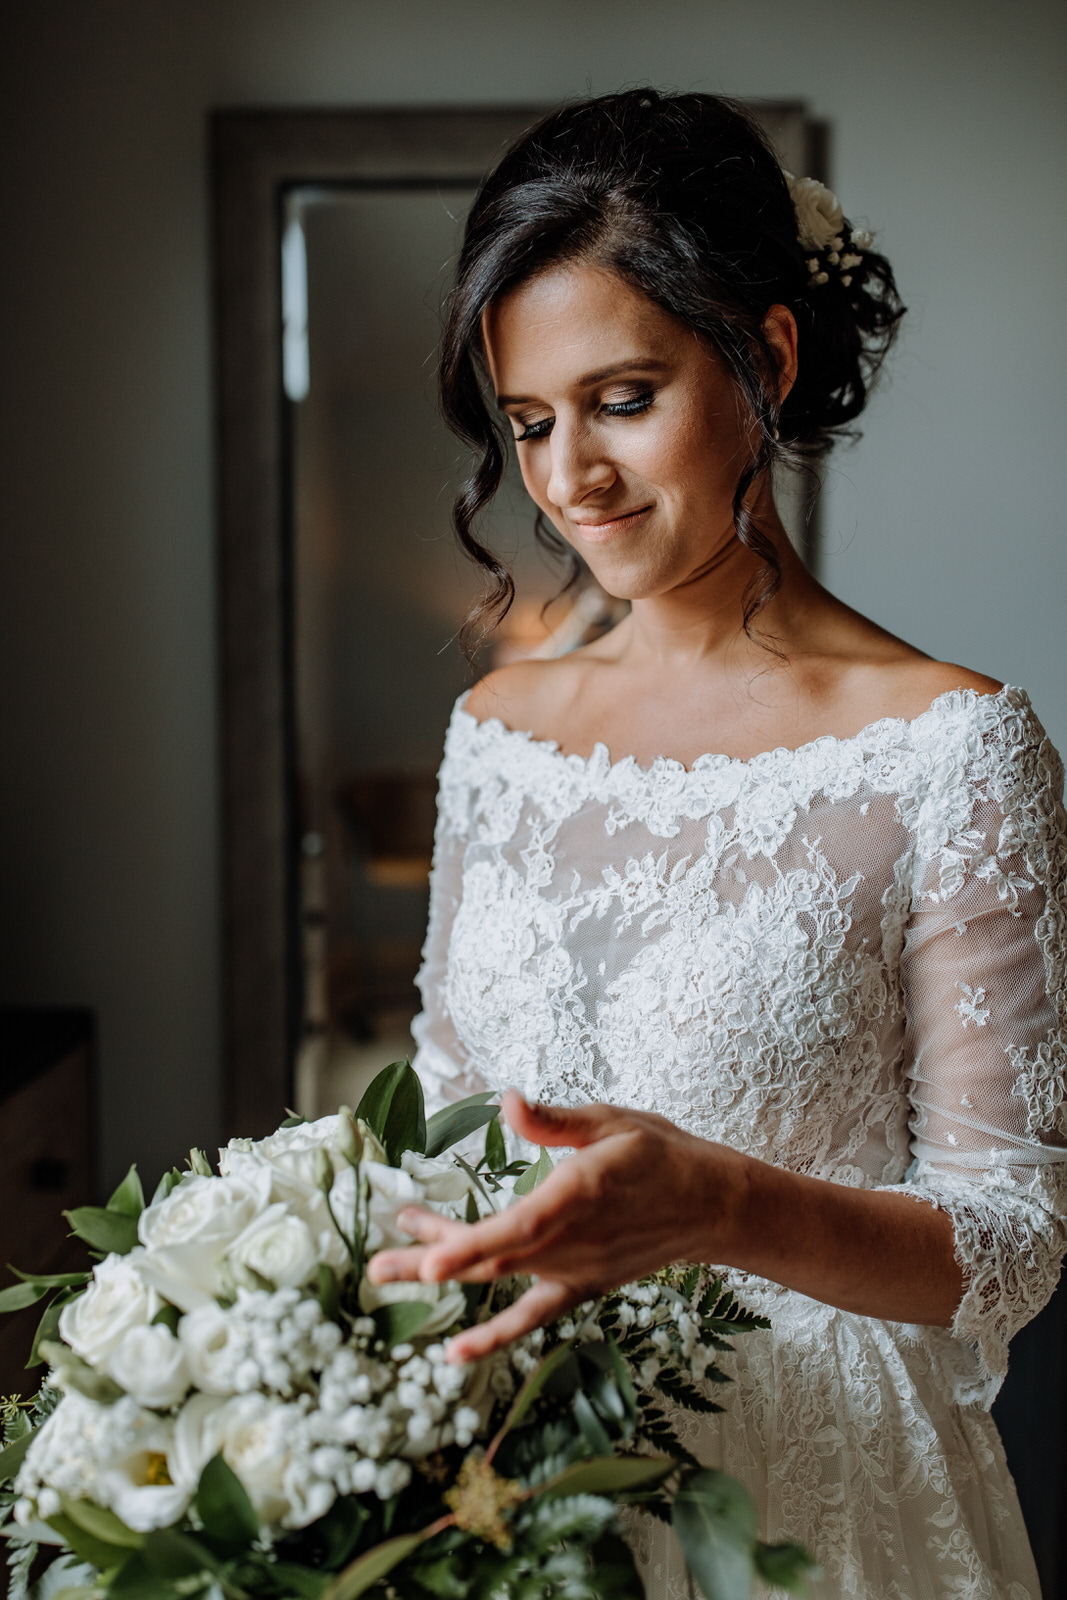 Woman in wedding dress looking at her flower bouquet